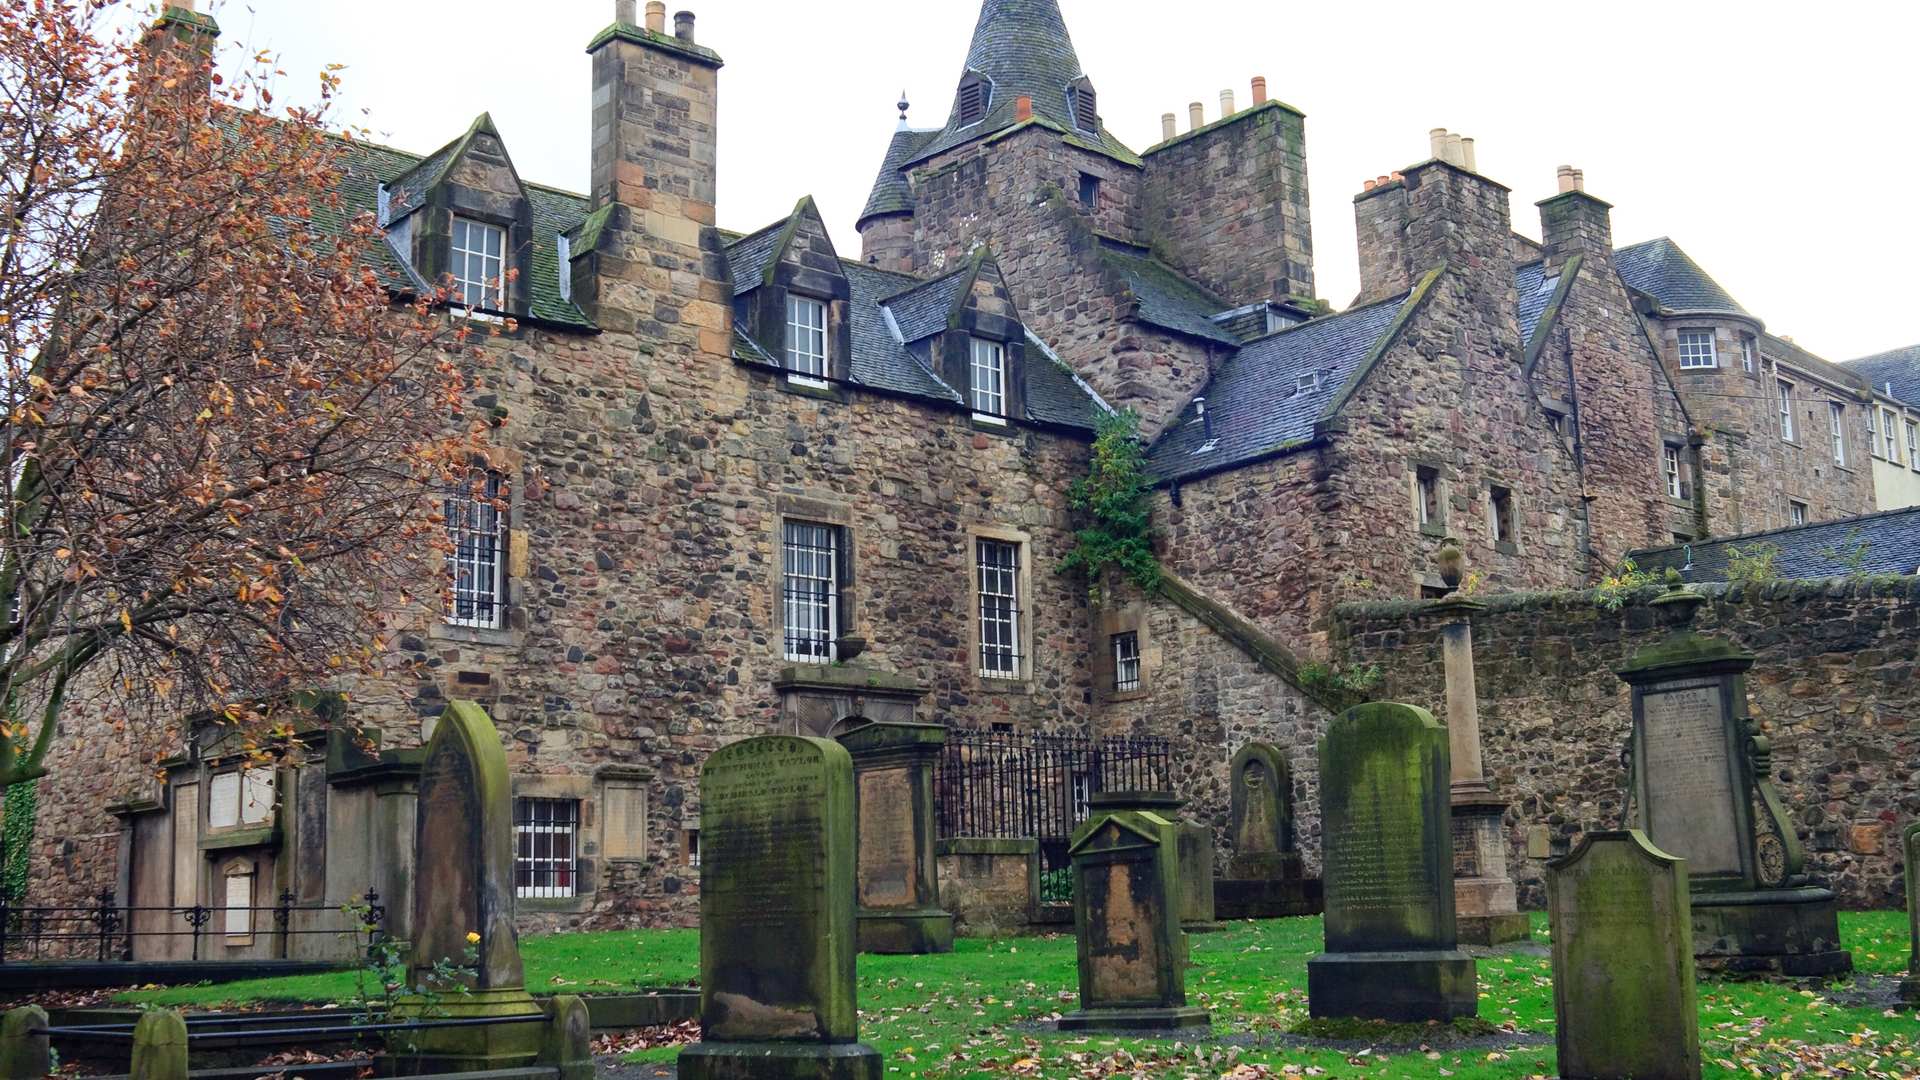 the graveyard is one of the most haunted places in Edinburgh